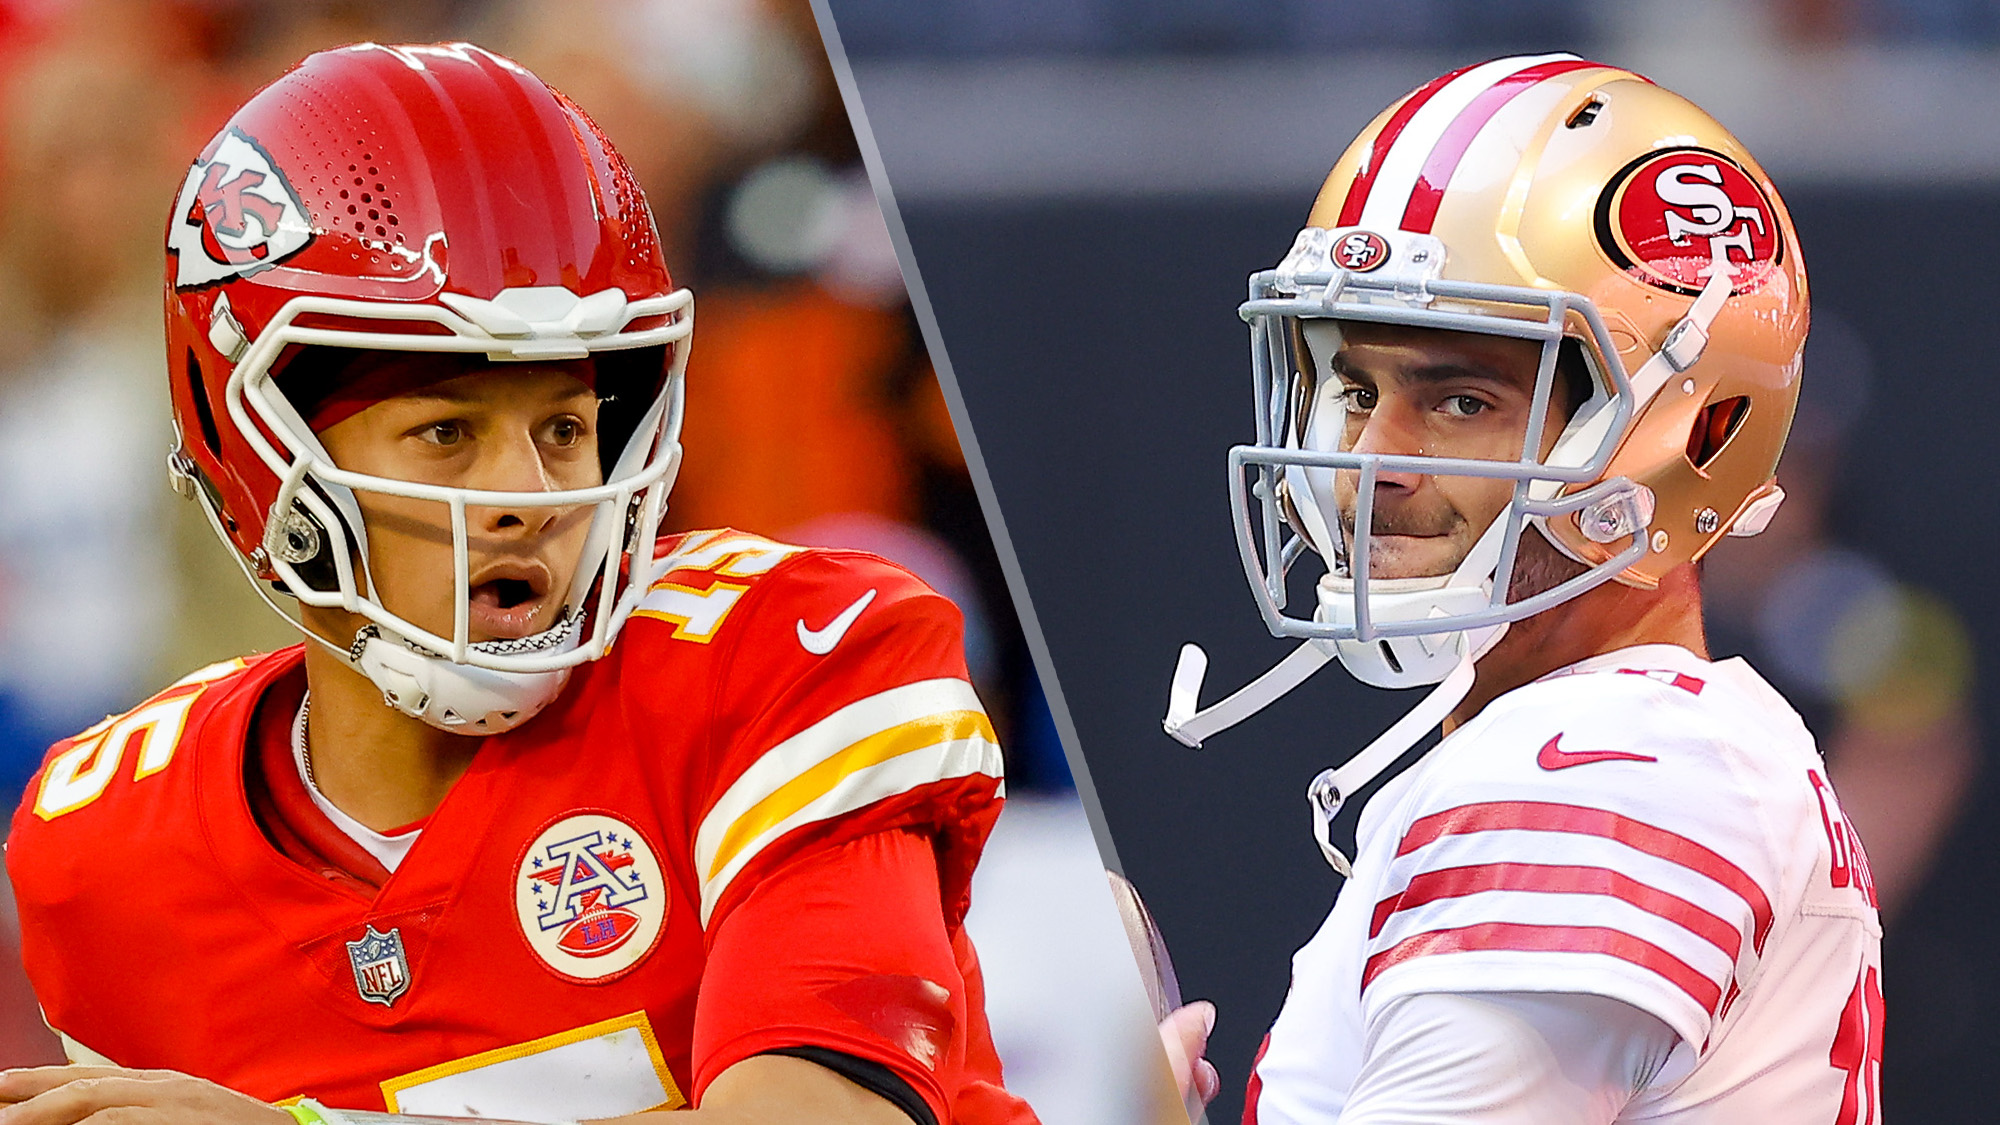 Chiefs vs 49ers live stream is today: How to watch NFL game online